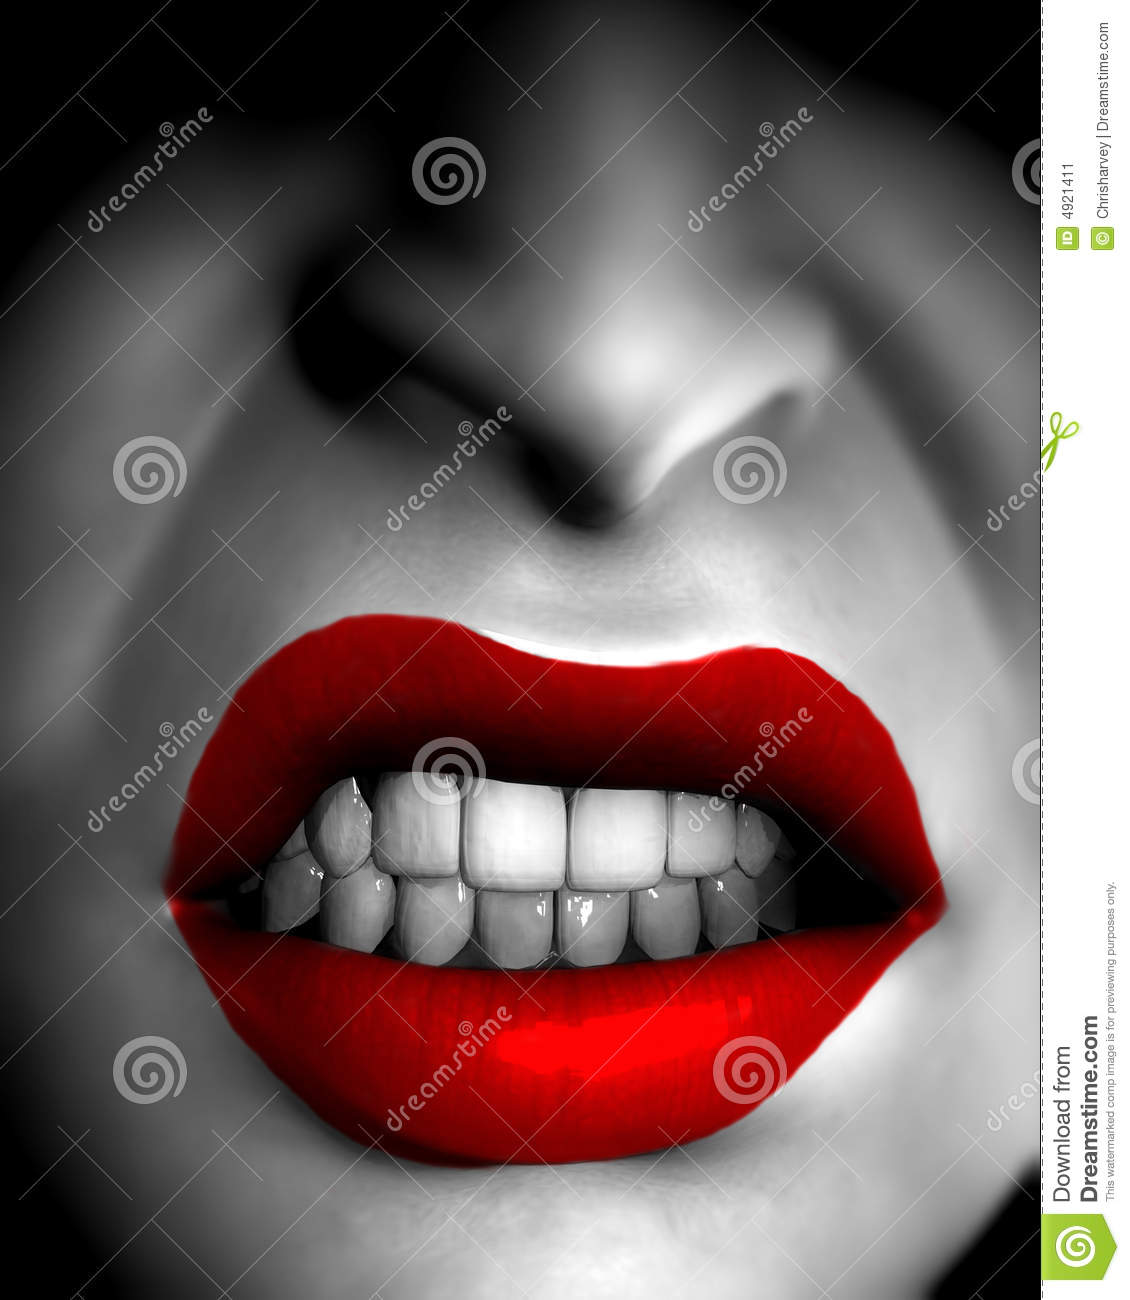 Angry Mouth 5 Stock Image   Image  4921411